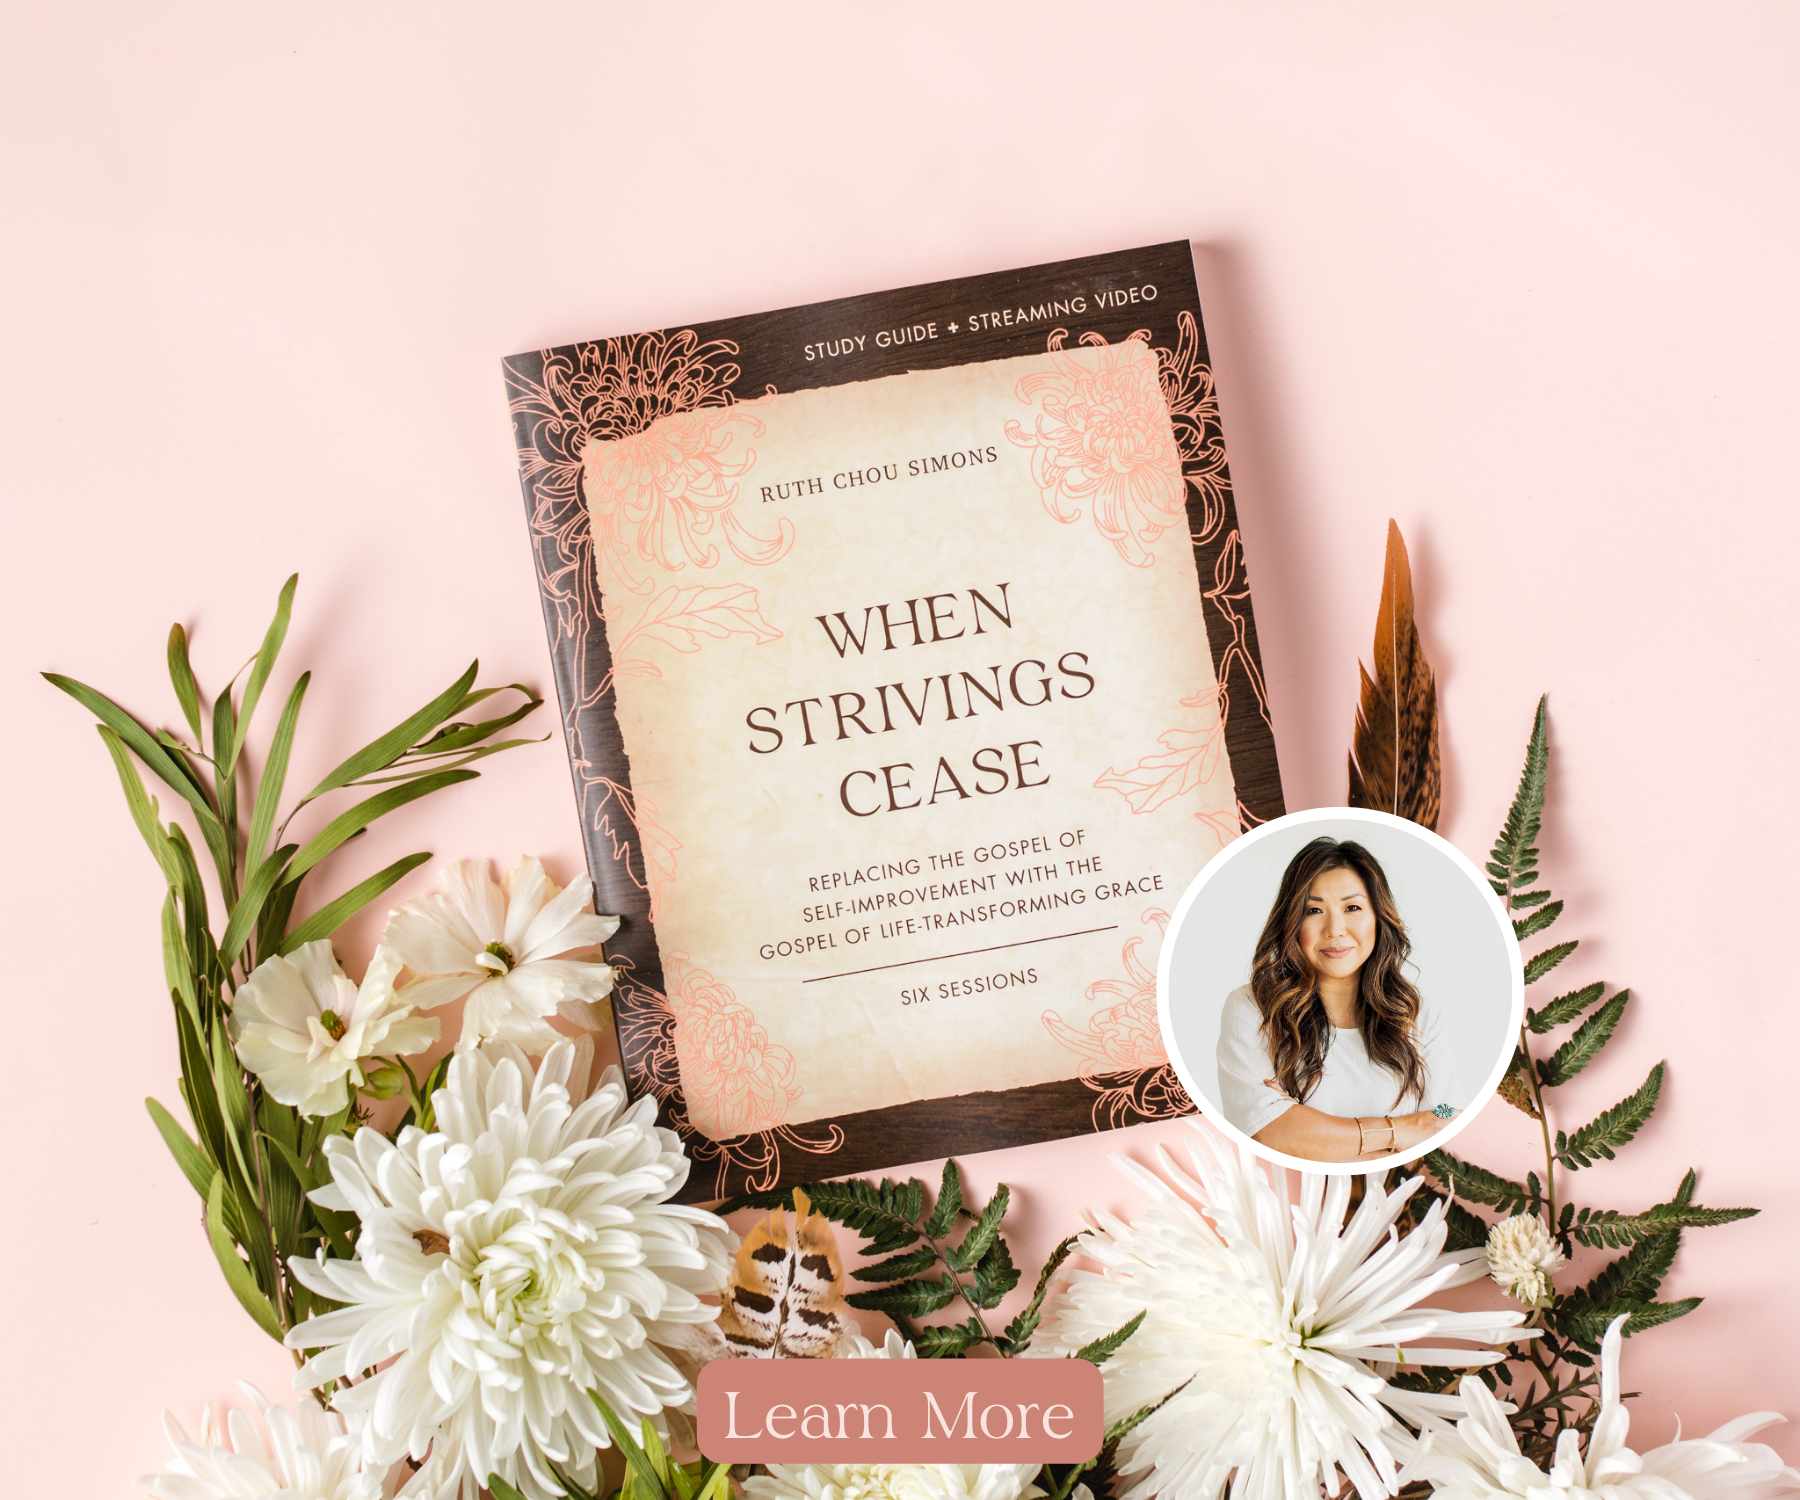 Author Ruth Chou Simons and her book and Bible Study Guide When Strivings Cease talks about freedom from shame